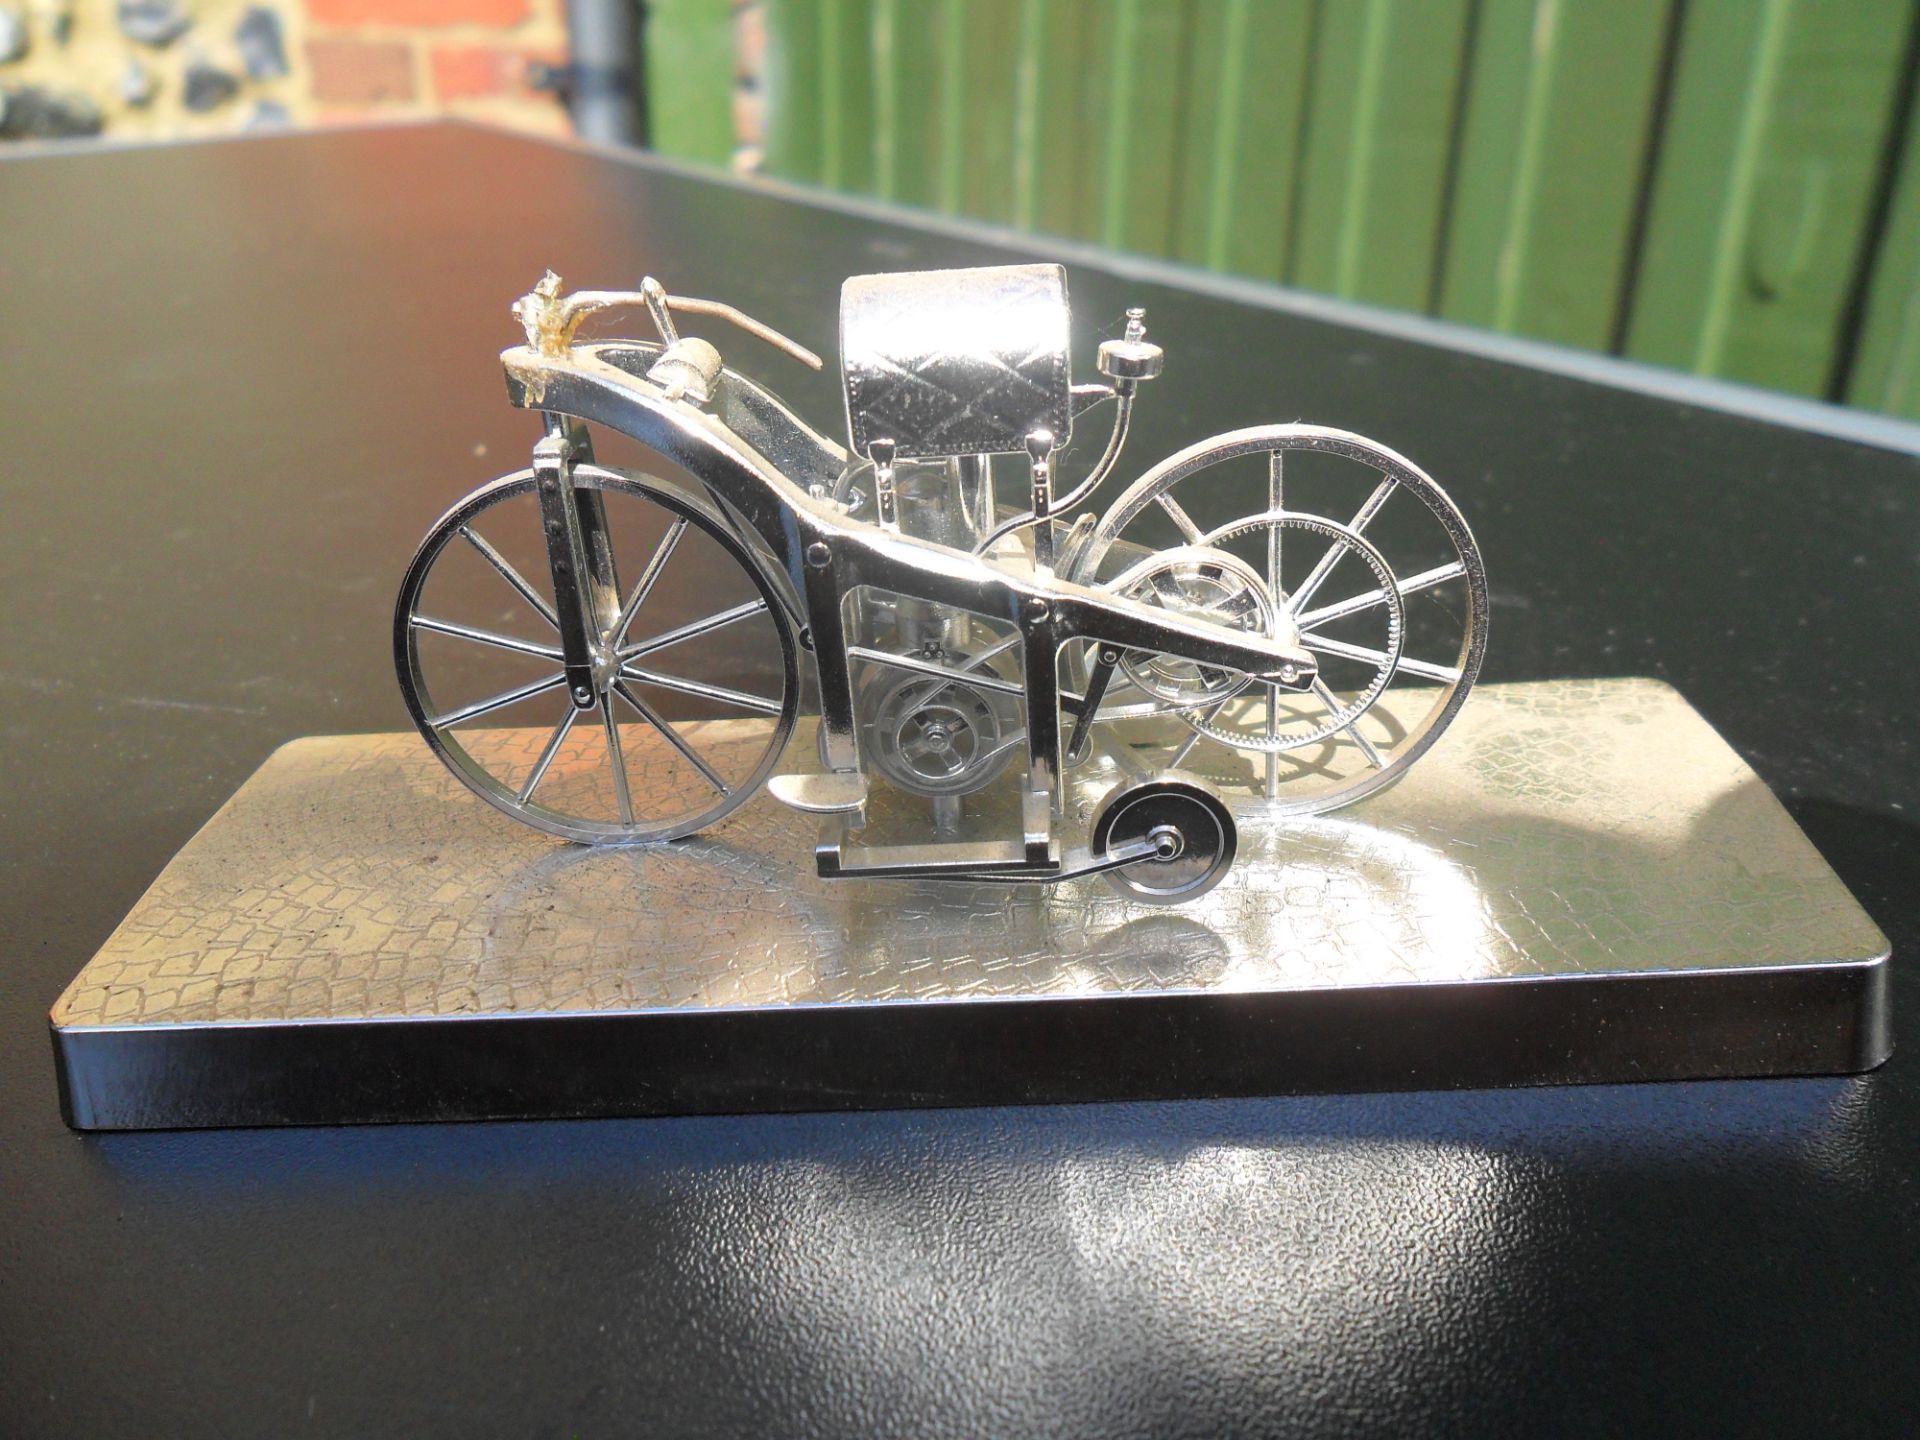 Model of the Daimler Einspur (the first motorcycle)